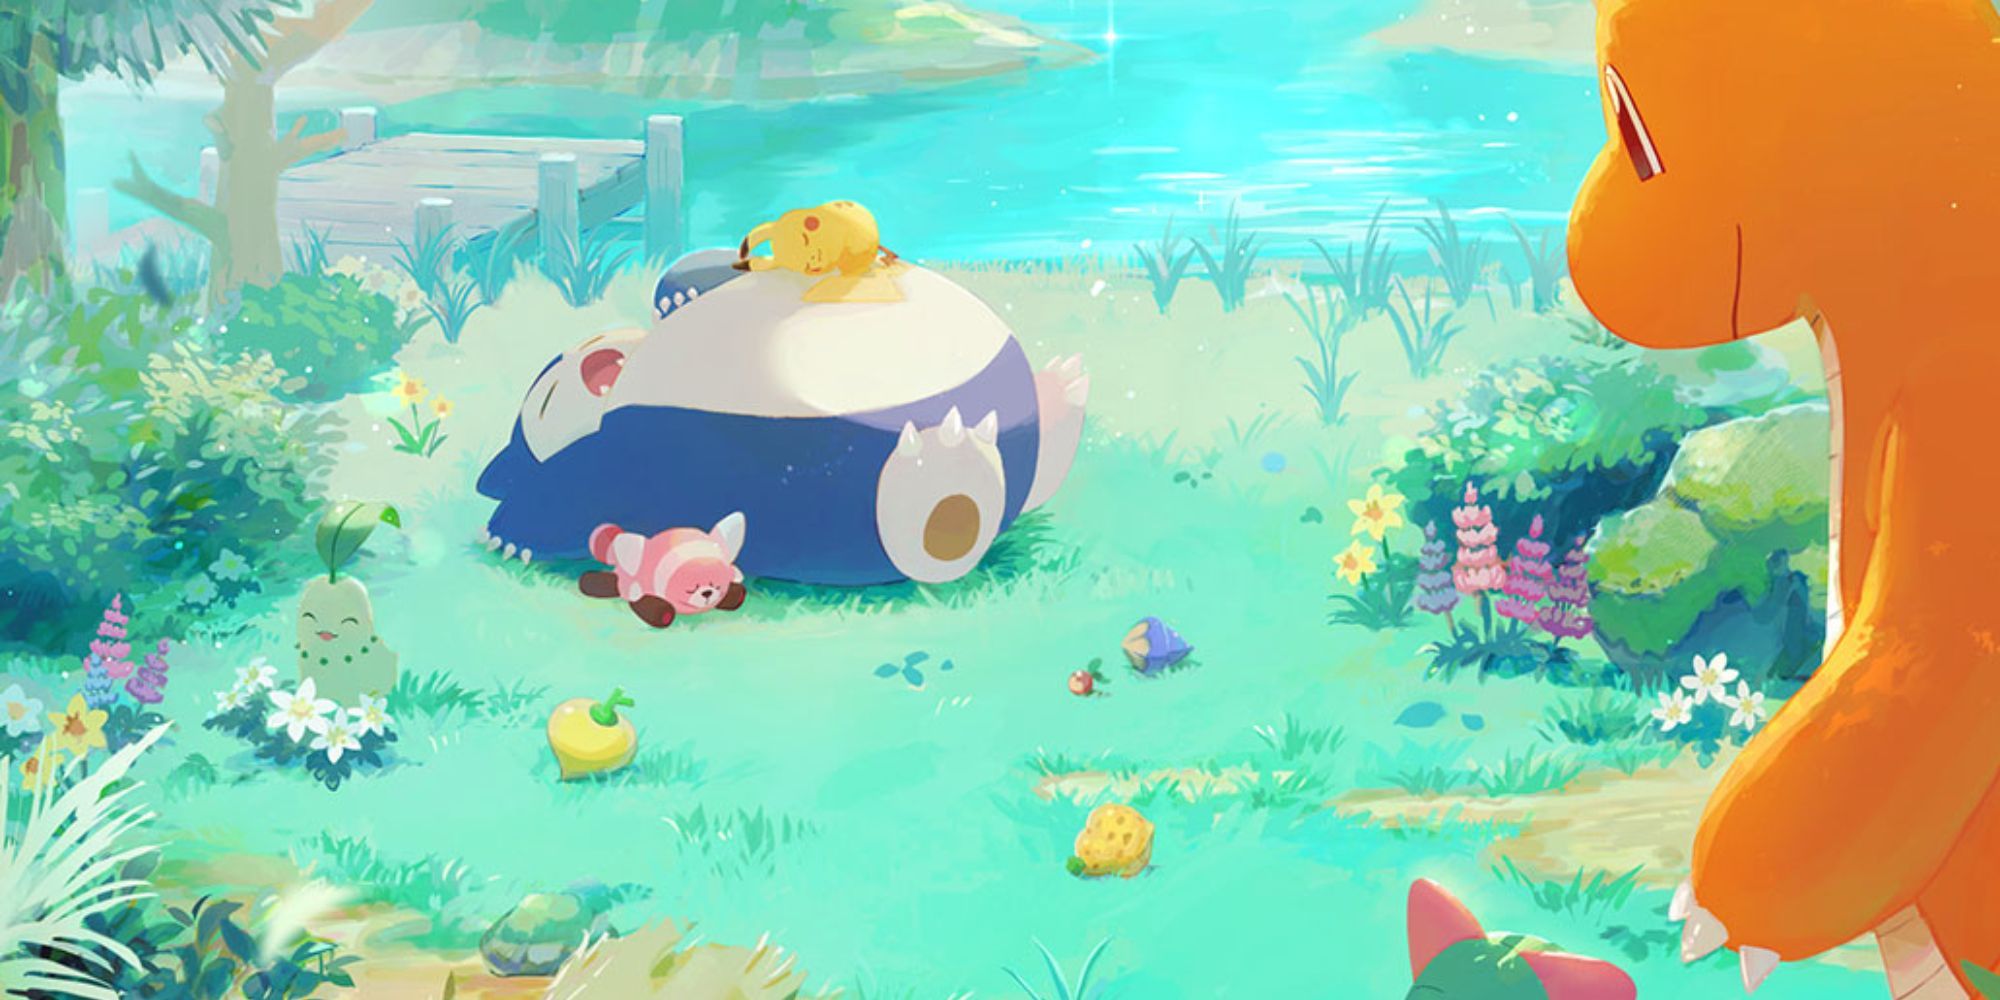 Art of a snorlax sleeping by a lake with a Pikachu, Stufful and Chikorita whule a Dragonite and Ralts approach